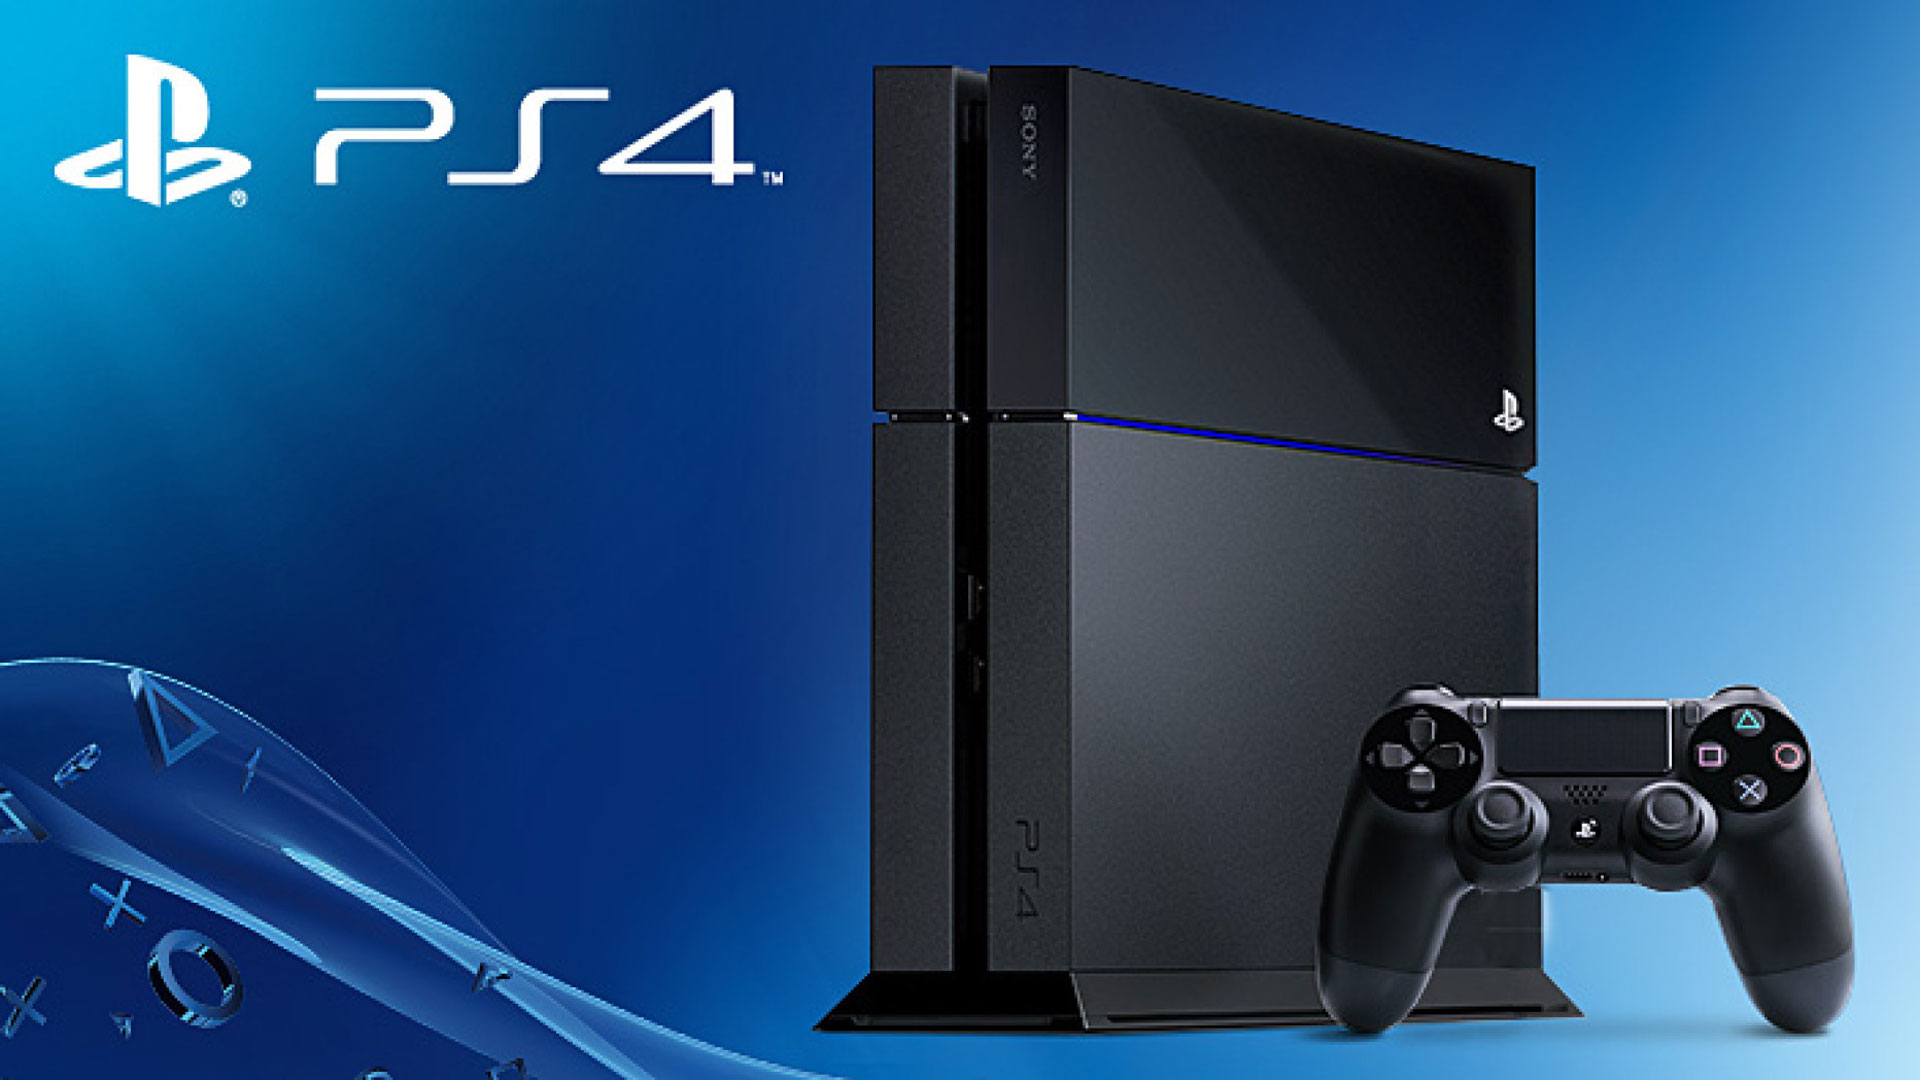 Potential new features for PlayStation 4 revealed?